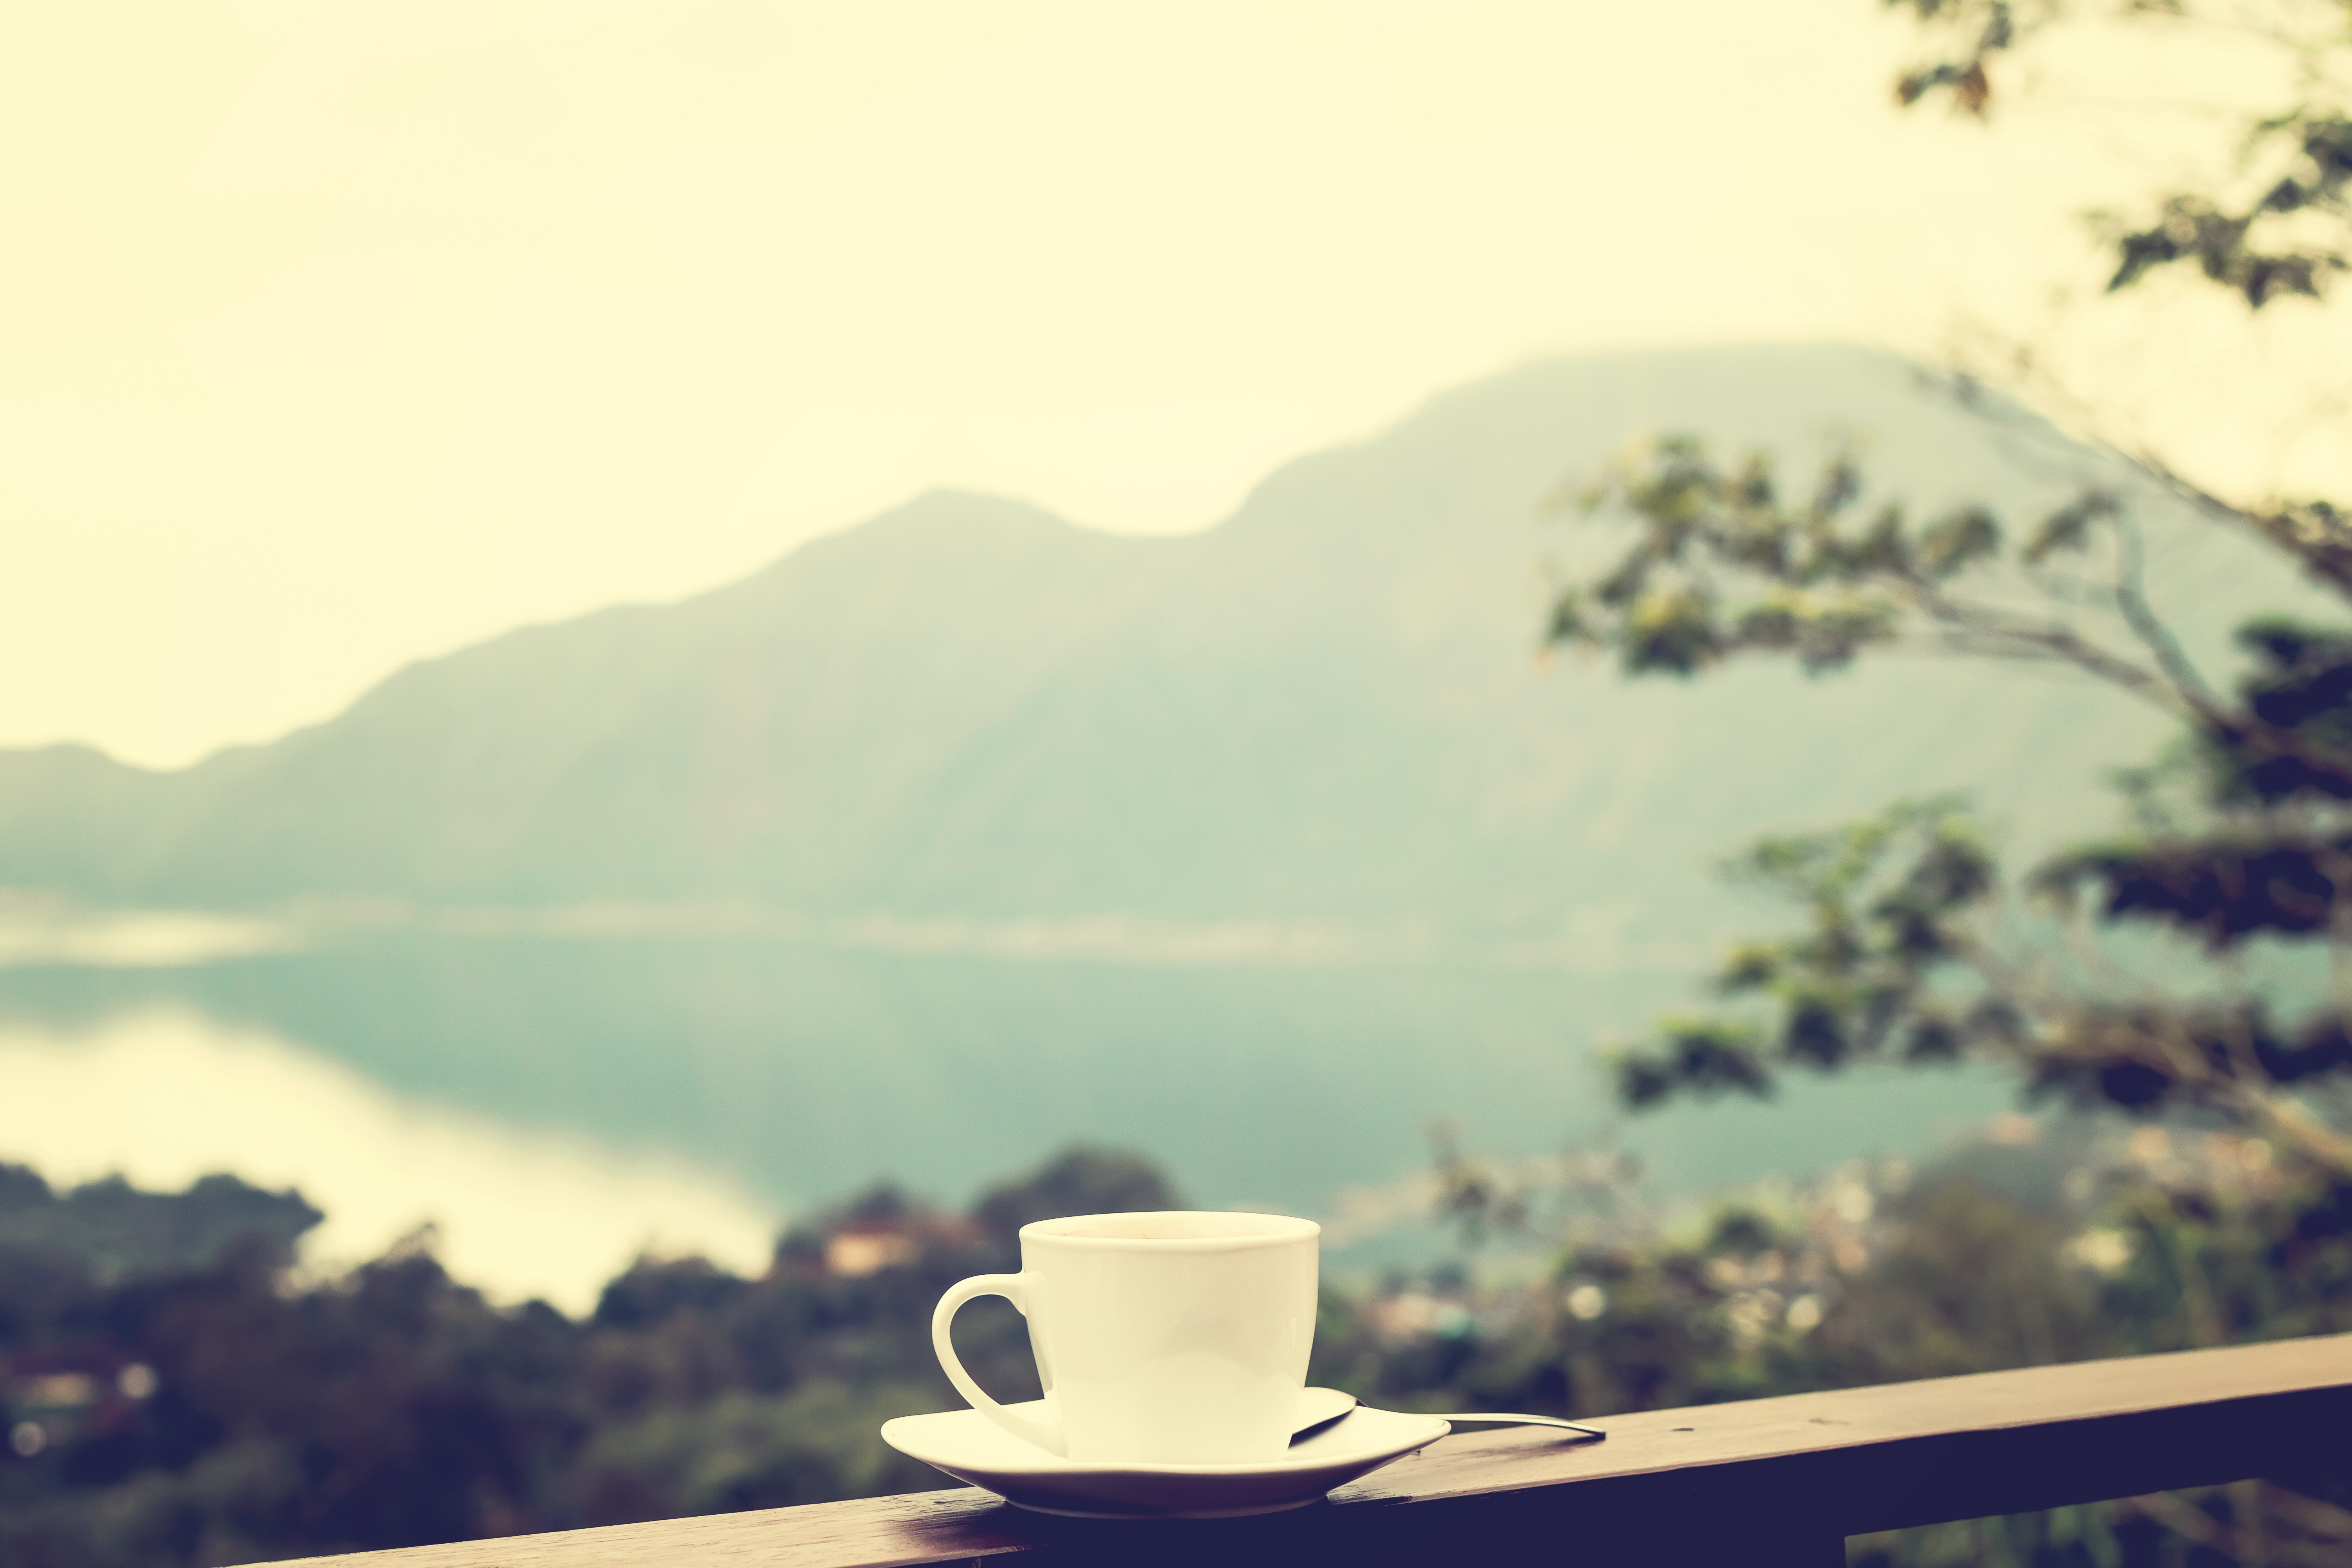 freedom, mountains, privacy, seclusion, miscellanea, miscellaneous, cup, mood High Definition image